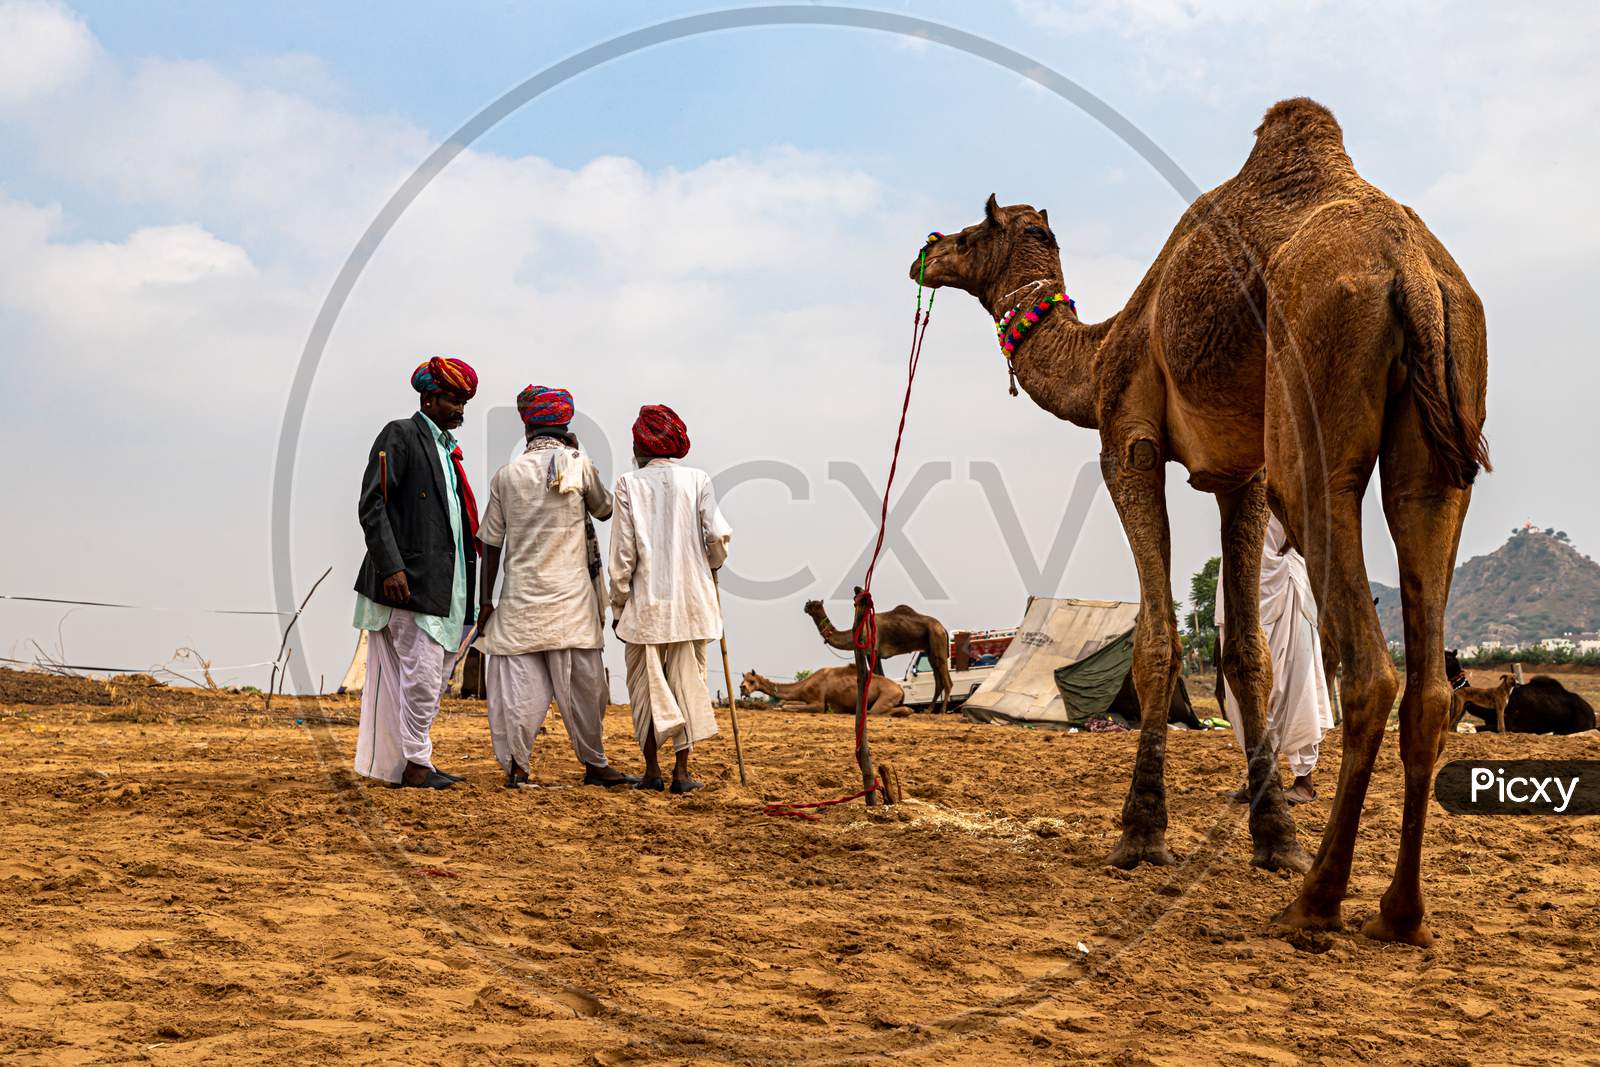 Cameleers With Their Camel At Pushkar Camel Festival.